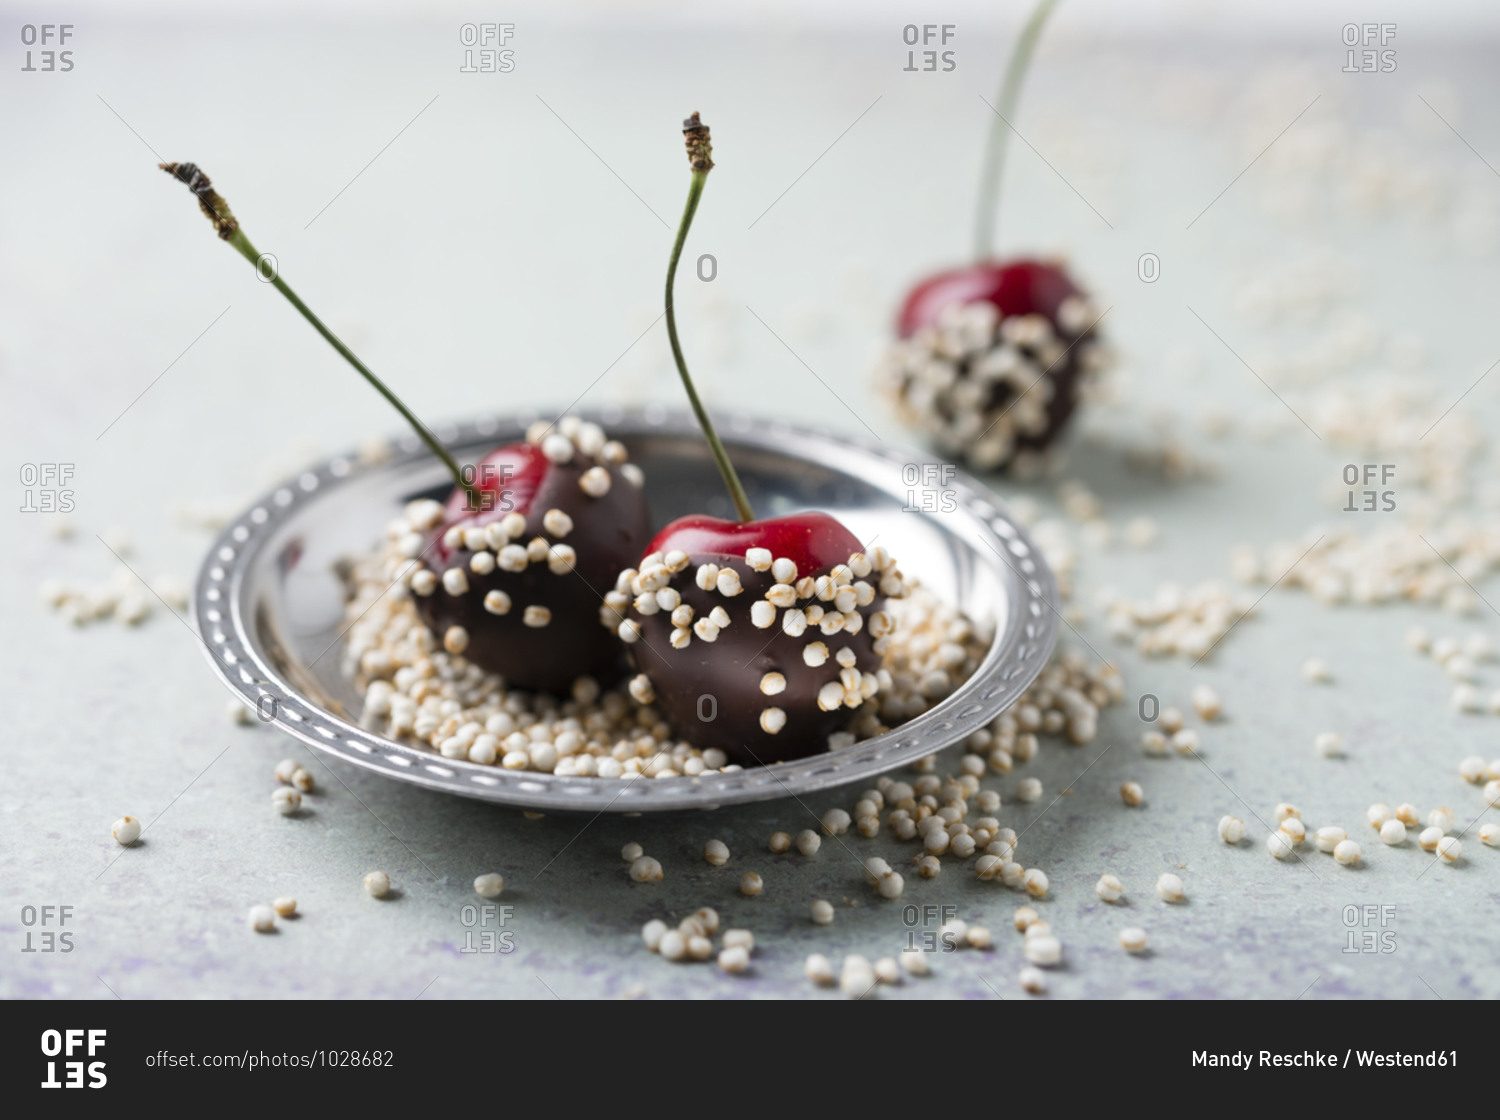 Close-up of chocolate covered cherries and quinoa in plate on table